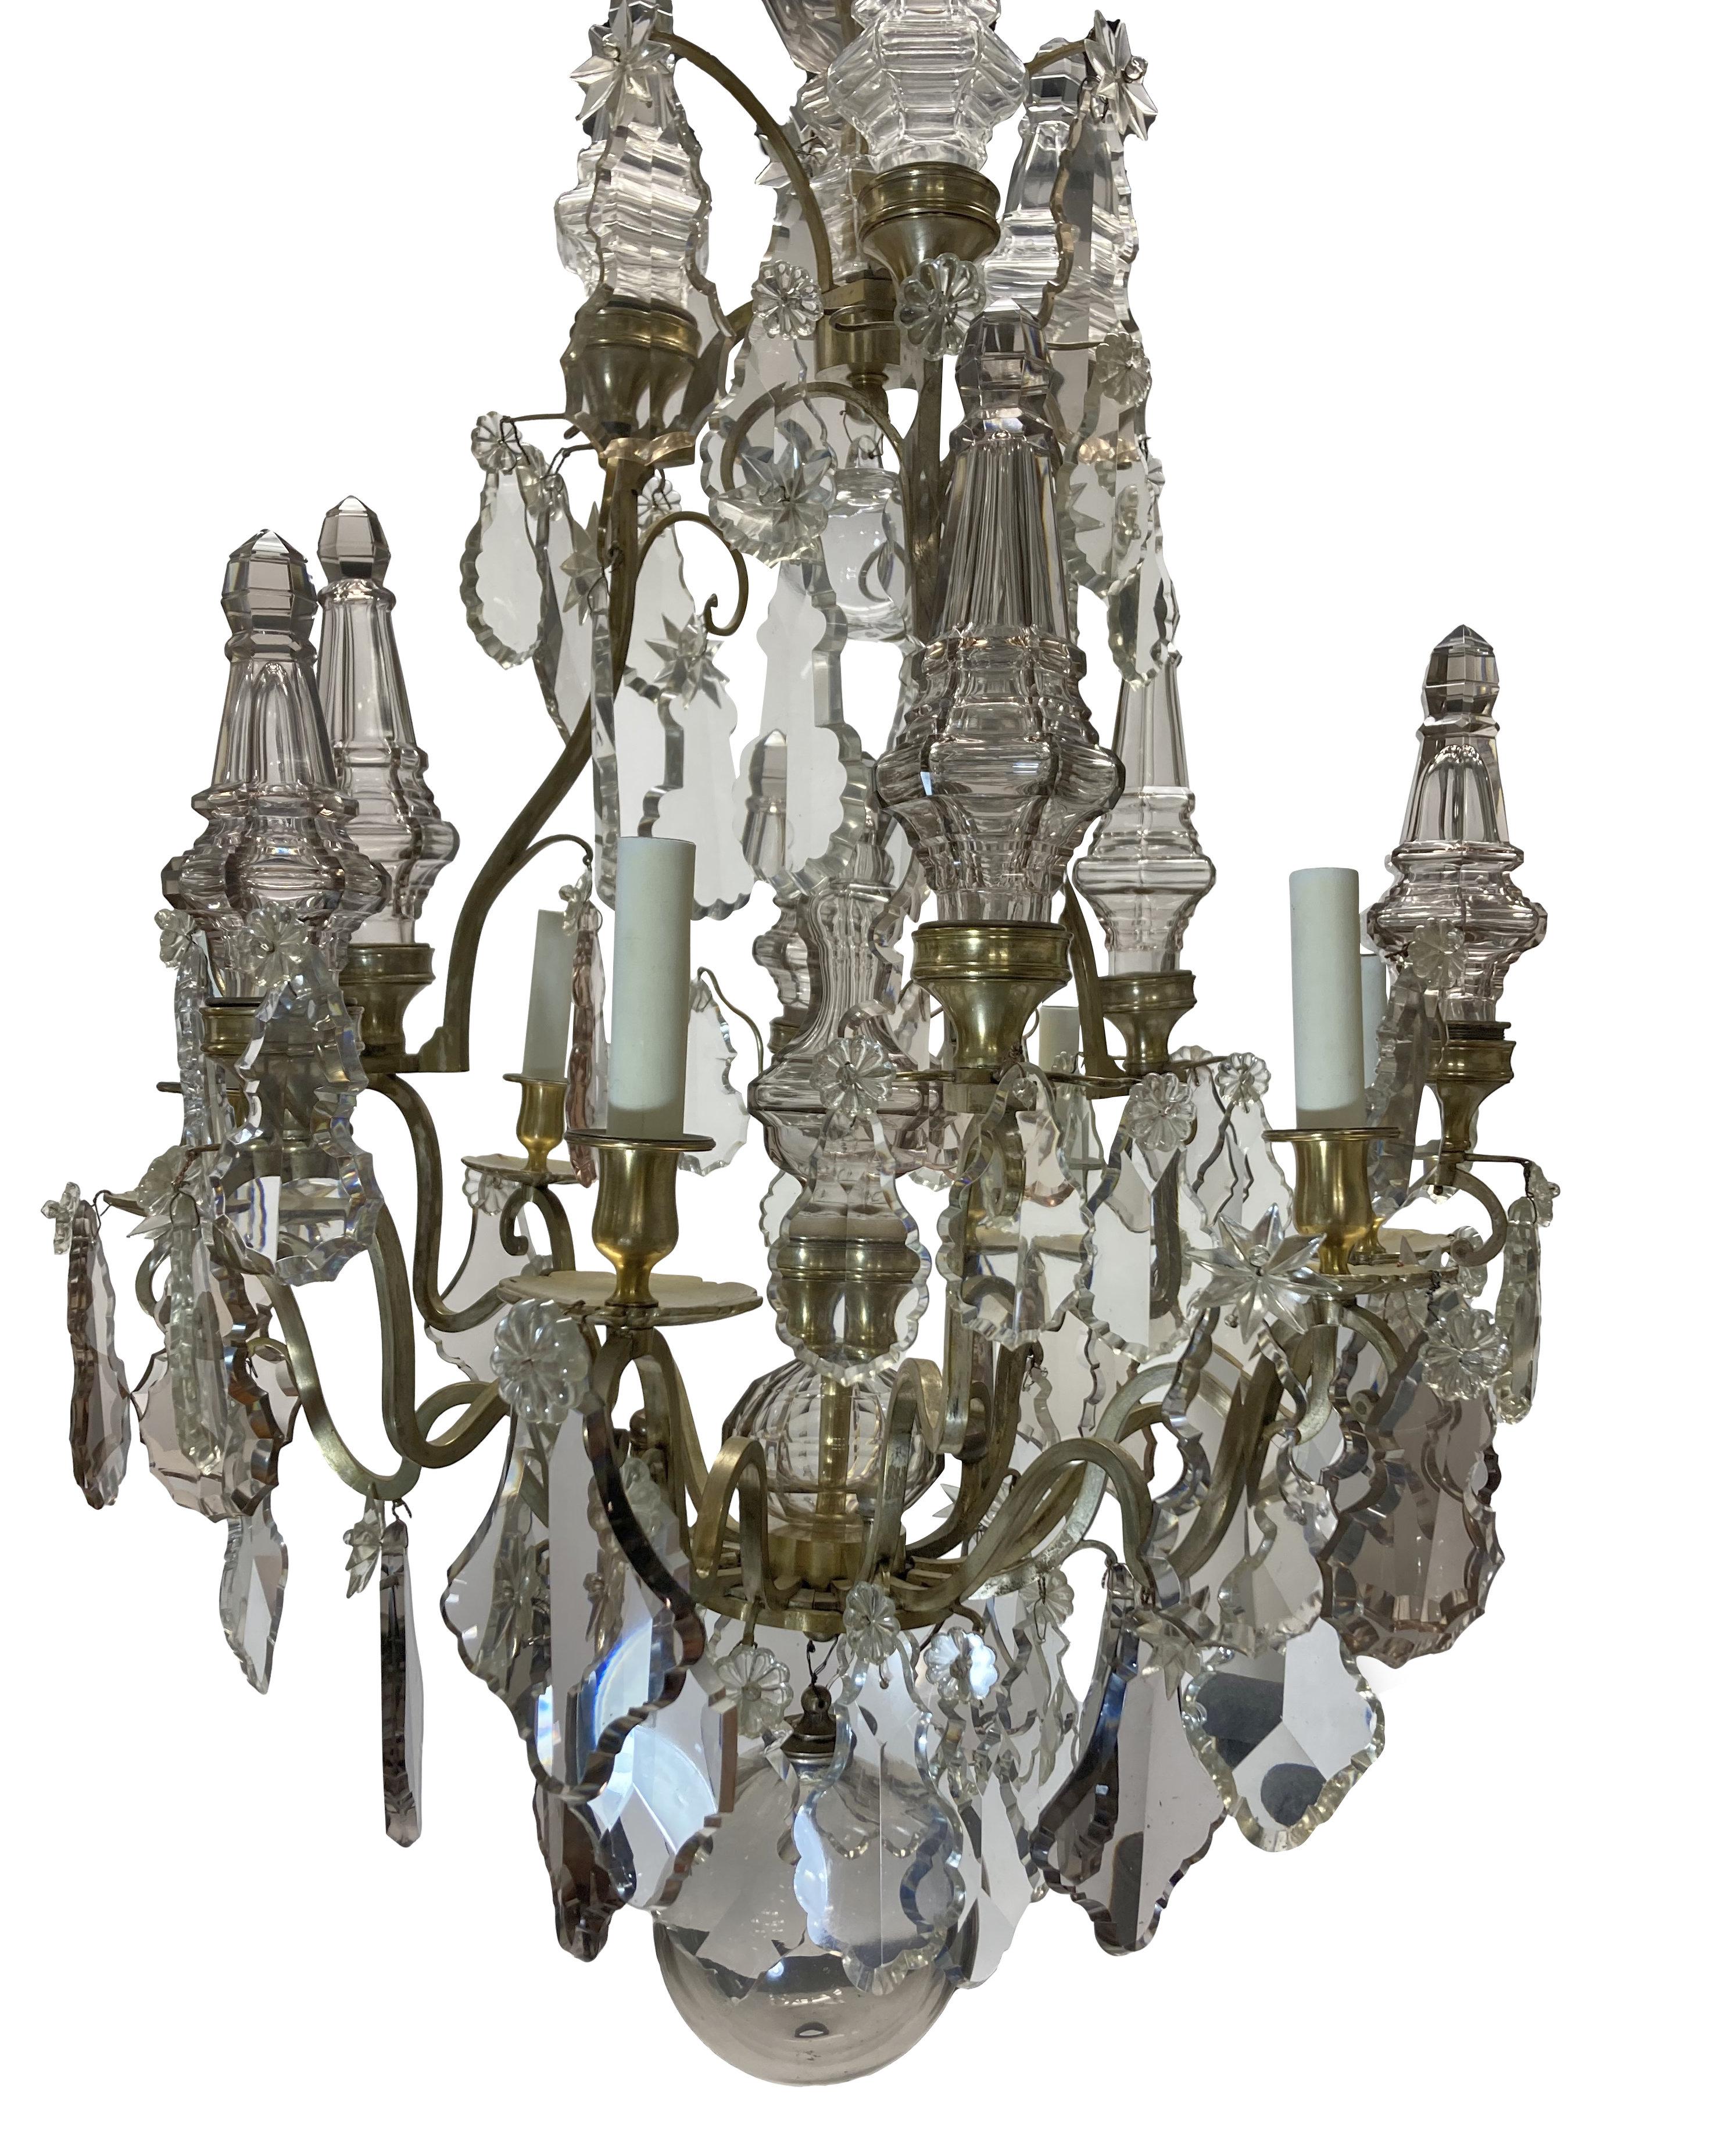 A fine French Louis XV style Baccarat chandelier, in gilt & silvered bronze and hung throughout with crystal in smoked quartz & rose quartz. The spires and ball at the bottom are all over-scale, giving an opulent feel. With six electrified arms.